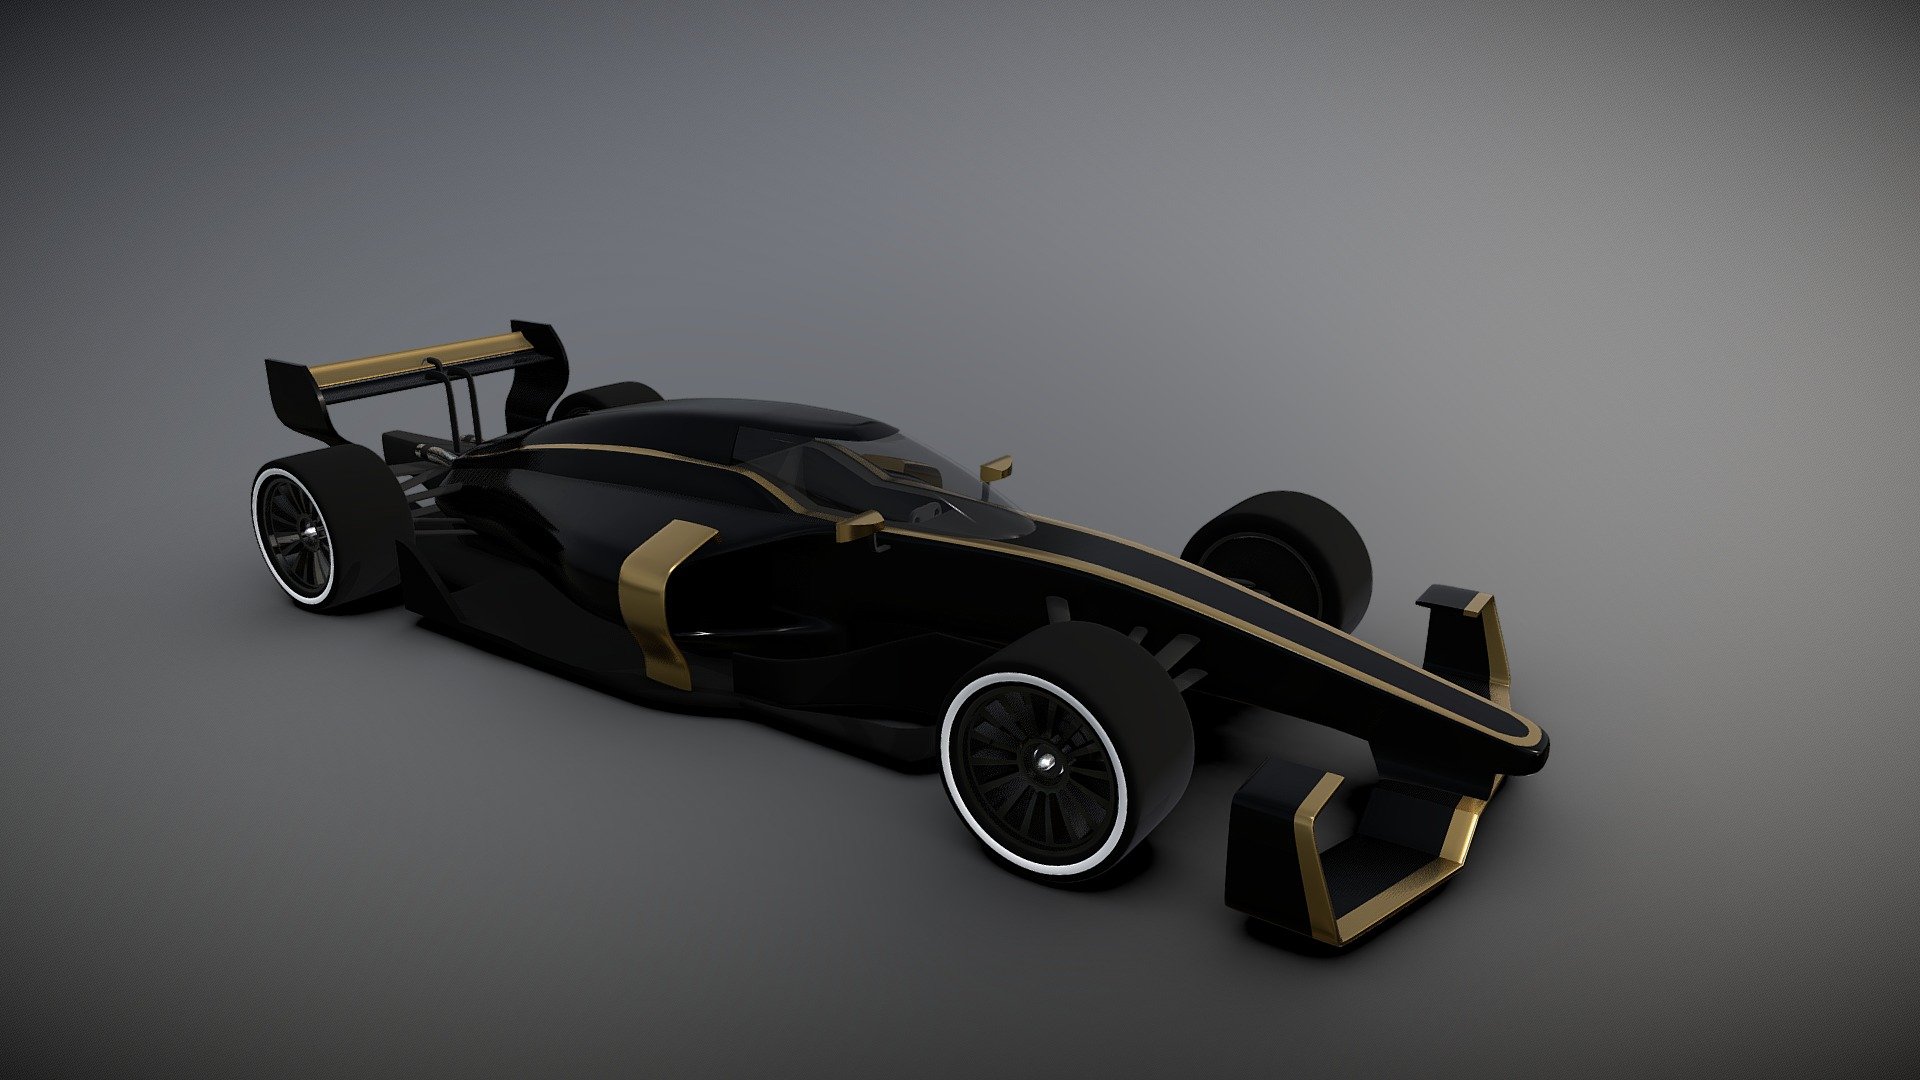 This is a 3d model of a concept F1 car that you have created. Which I was also inspired by some of the existing cars. And this model has high poly 3d model